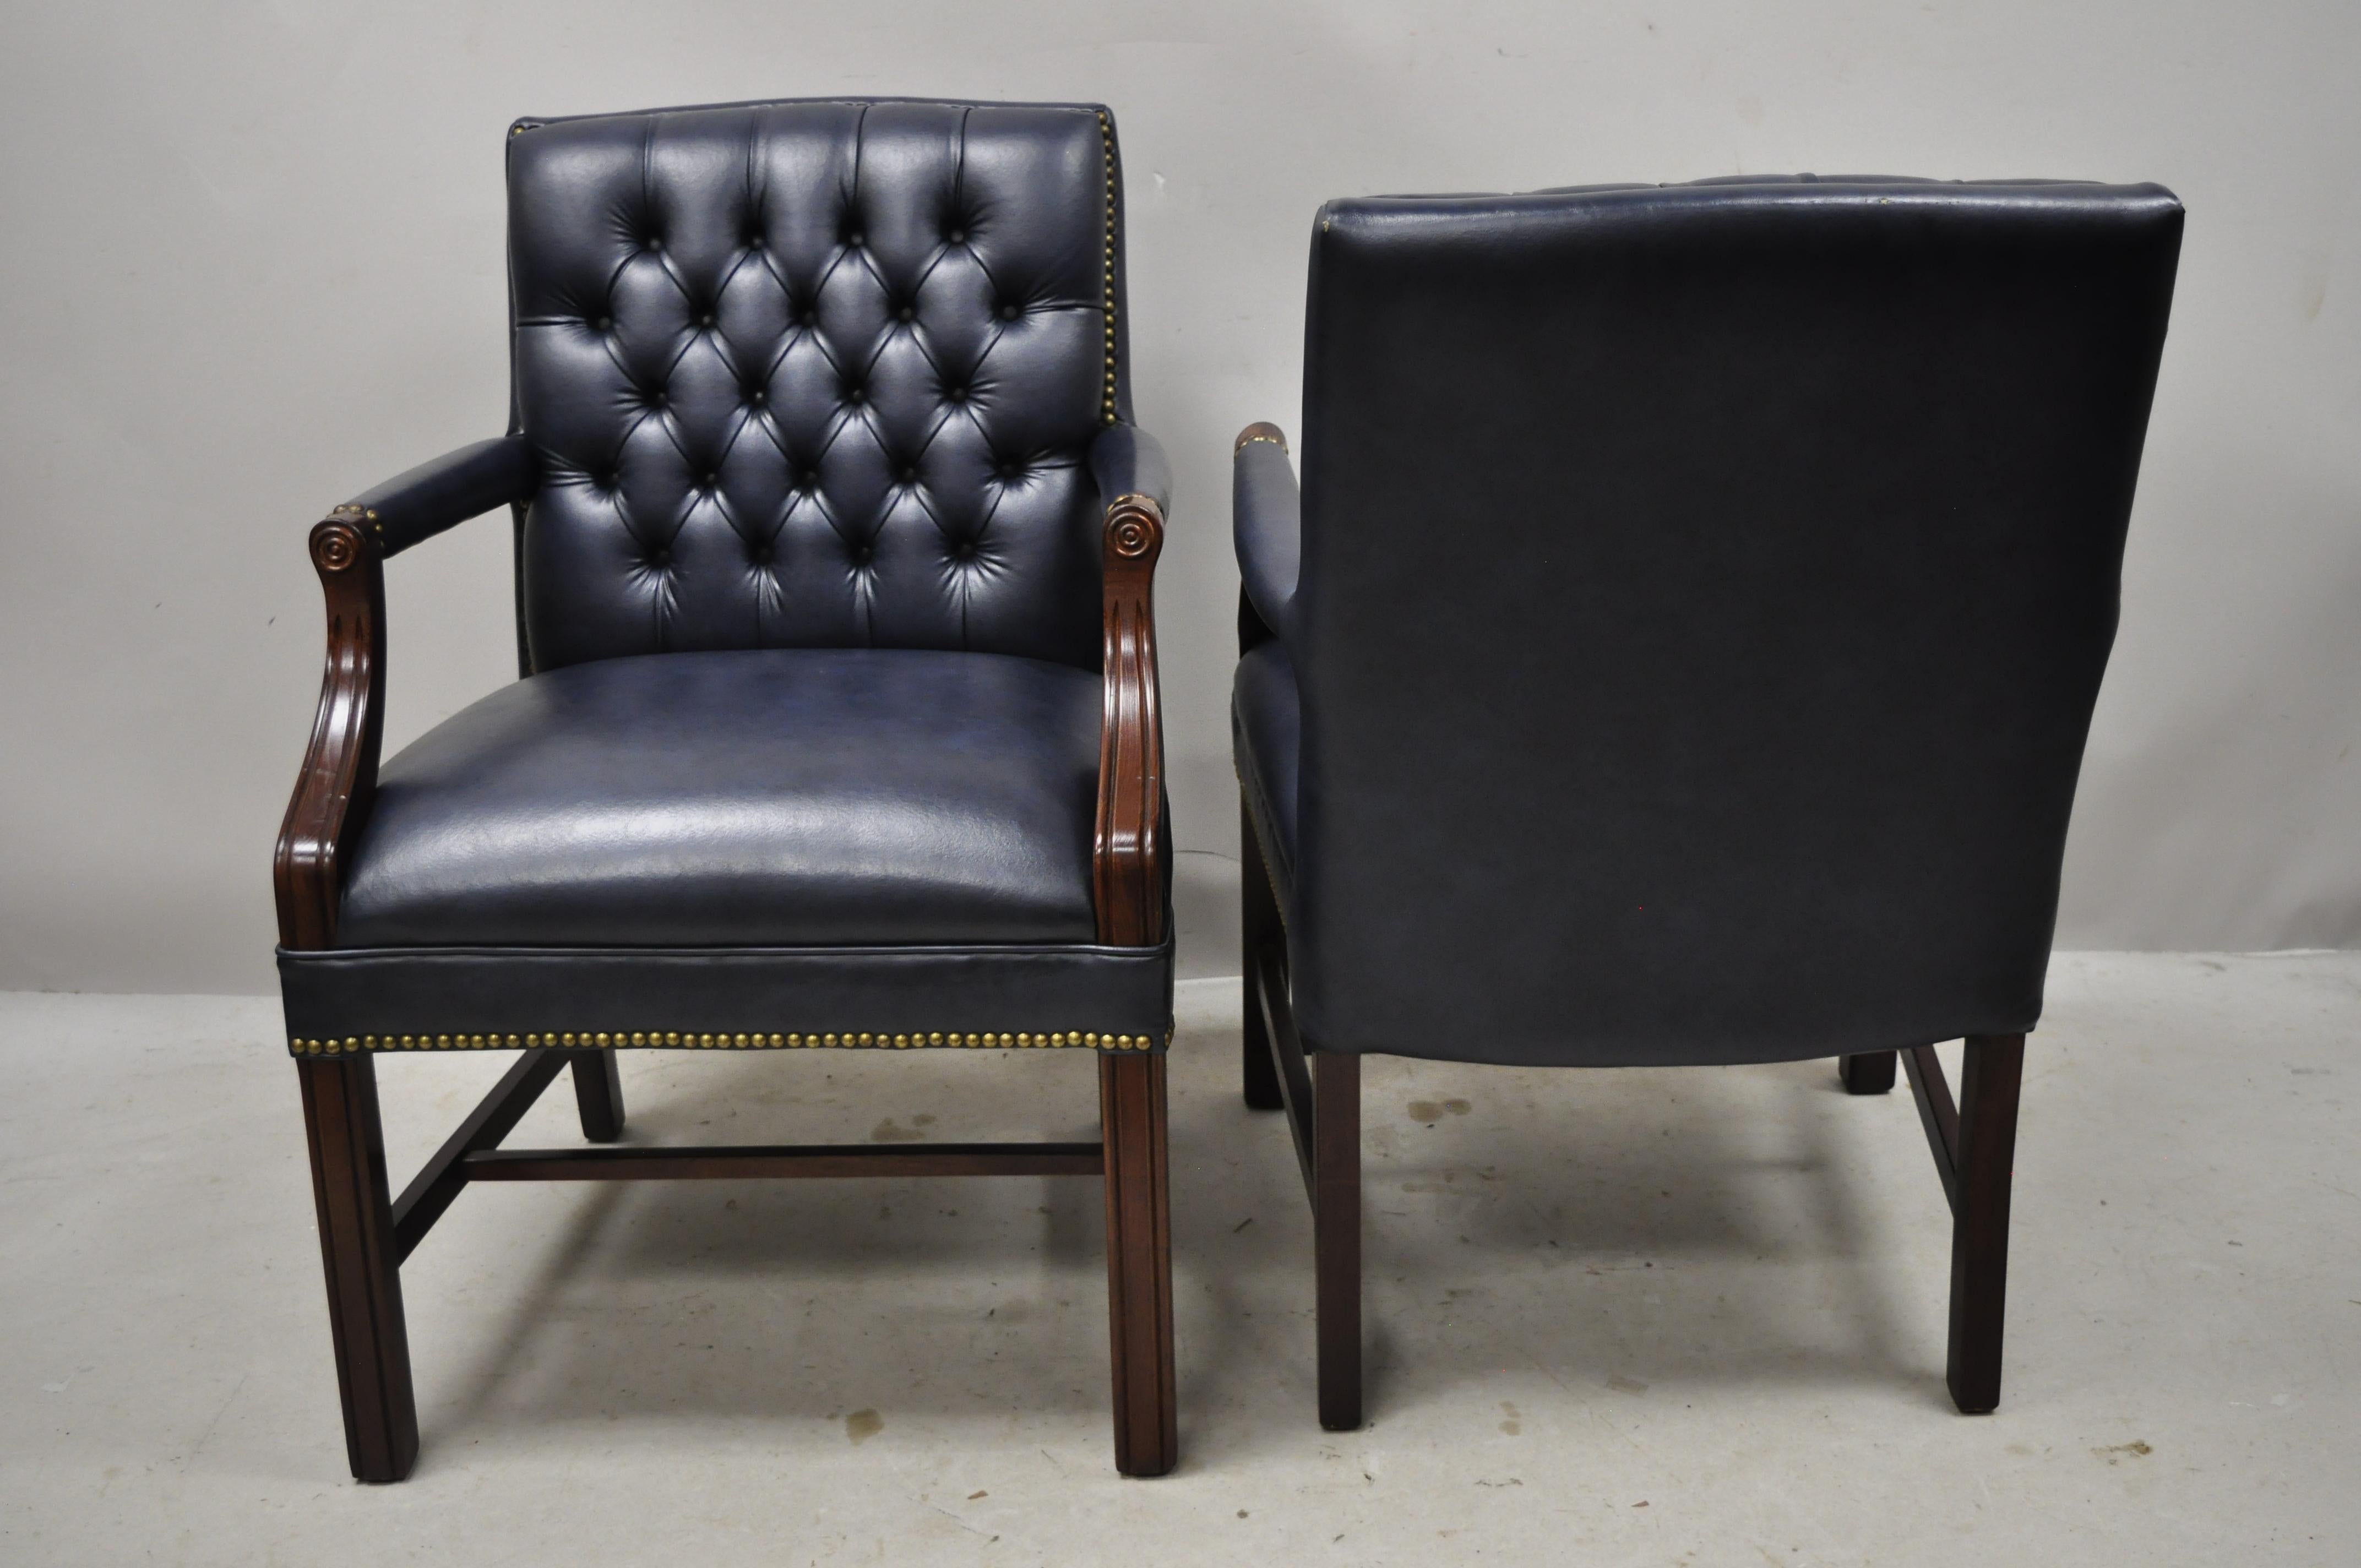 Naugahyde English Chippendale Paoli Inc Blue Tufted Faux Leather Vinyl Armchairs, a Pair